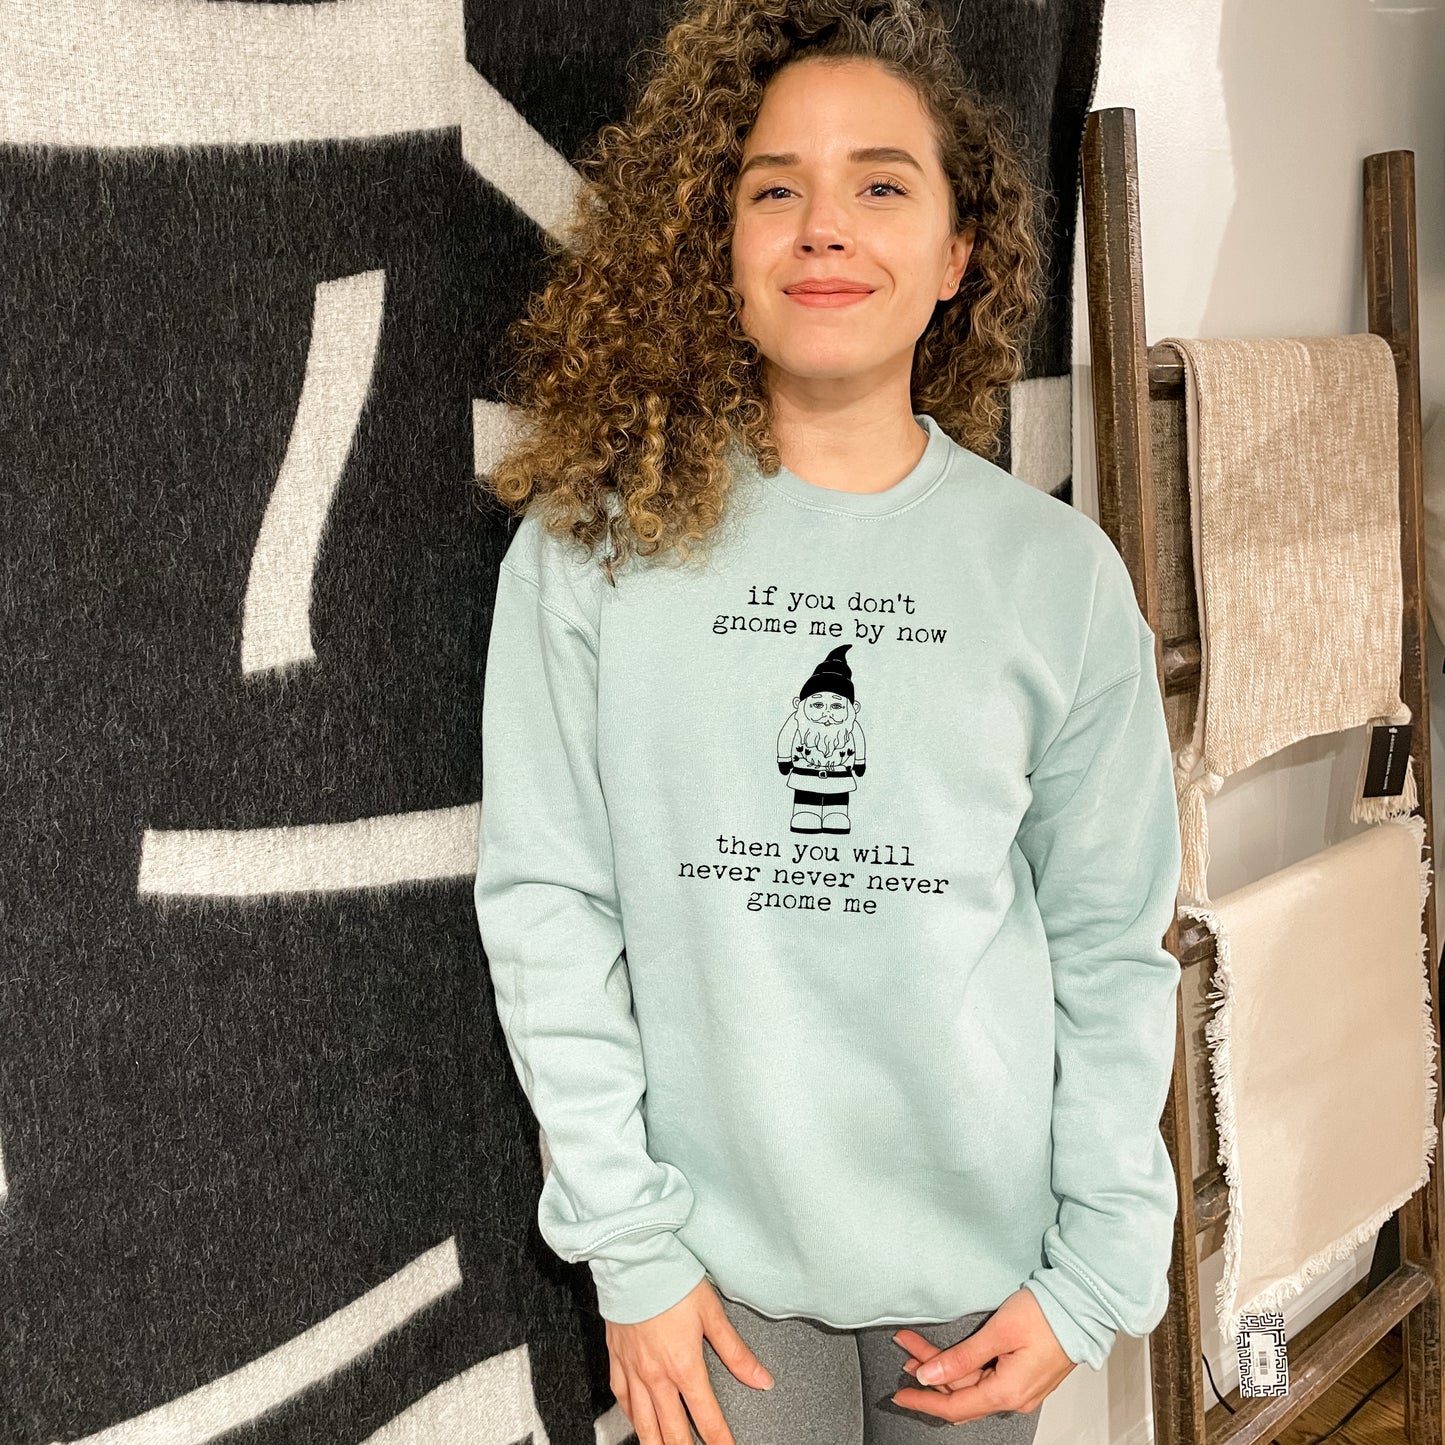 If You Don't Gnome Me By Now - Unisex Sweatshirt - Heather Gray or Dusty Blue